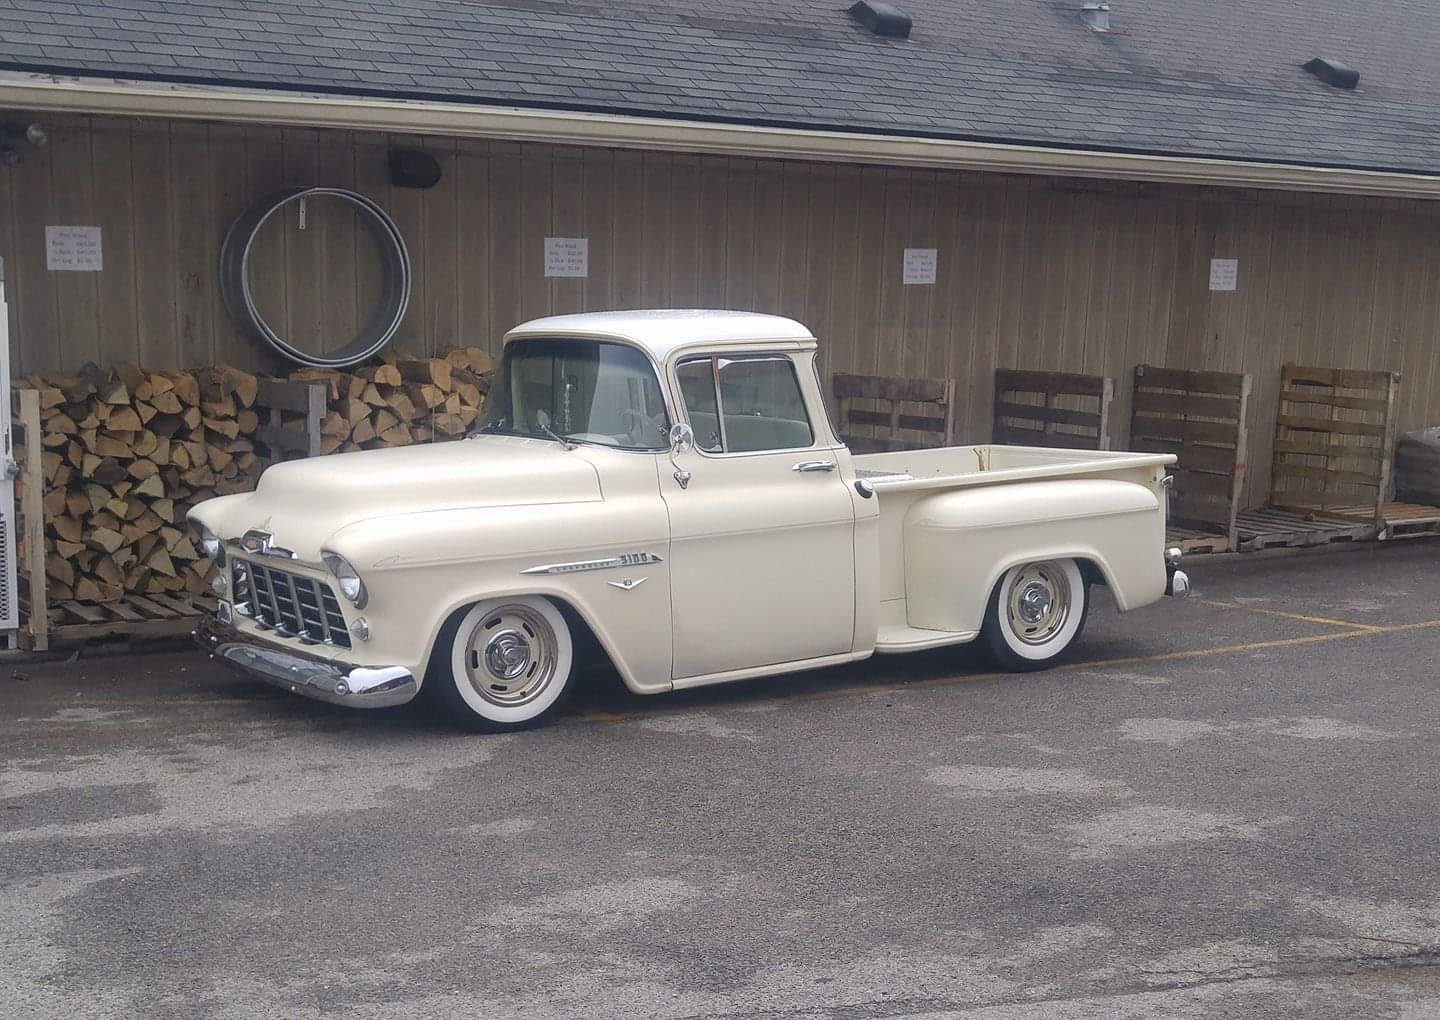 Came out of the hardware store and was greeted by this gorgeous ’56 Chevy truck.